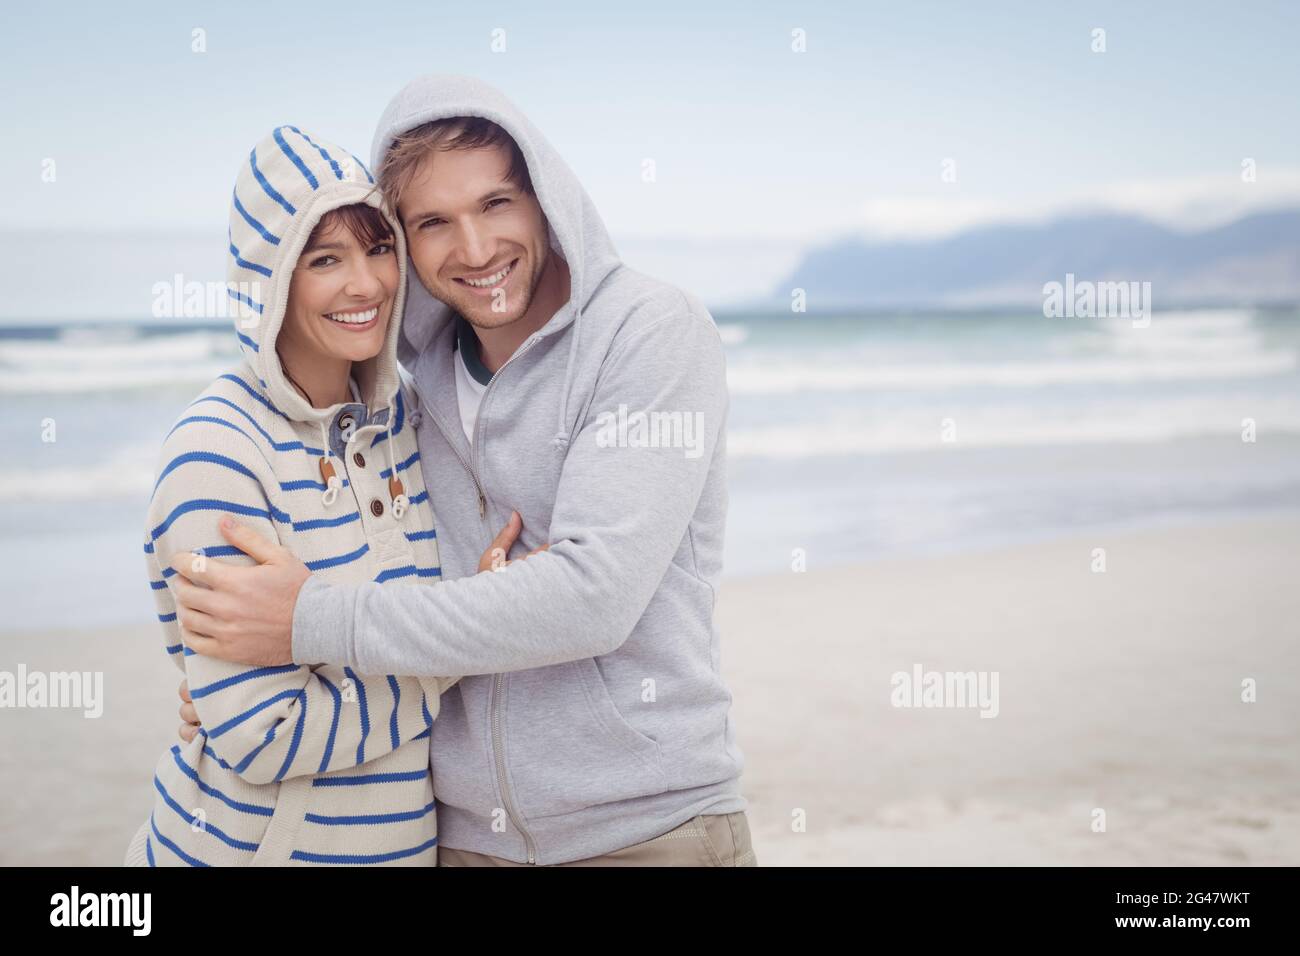 Portrait of smiling couple wearing hooded sweater during winter Stock Photo